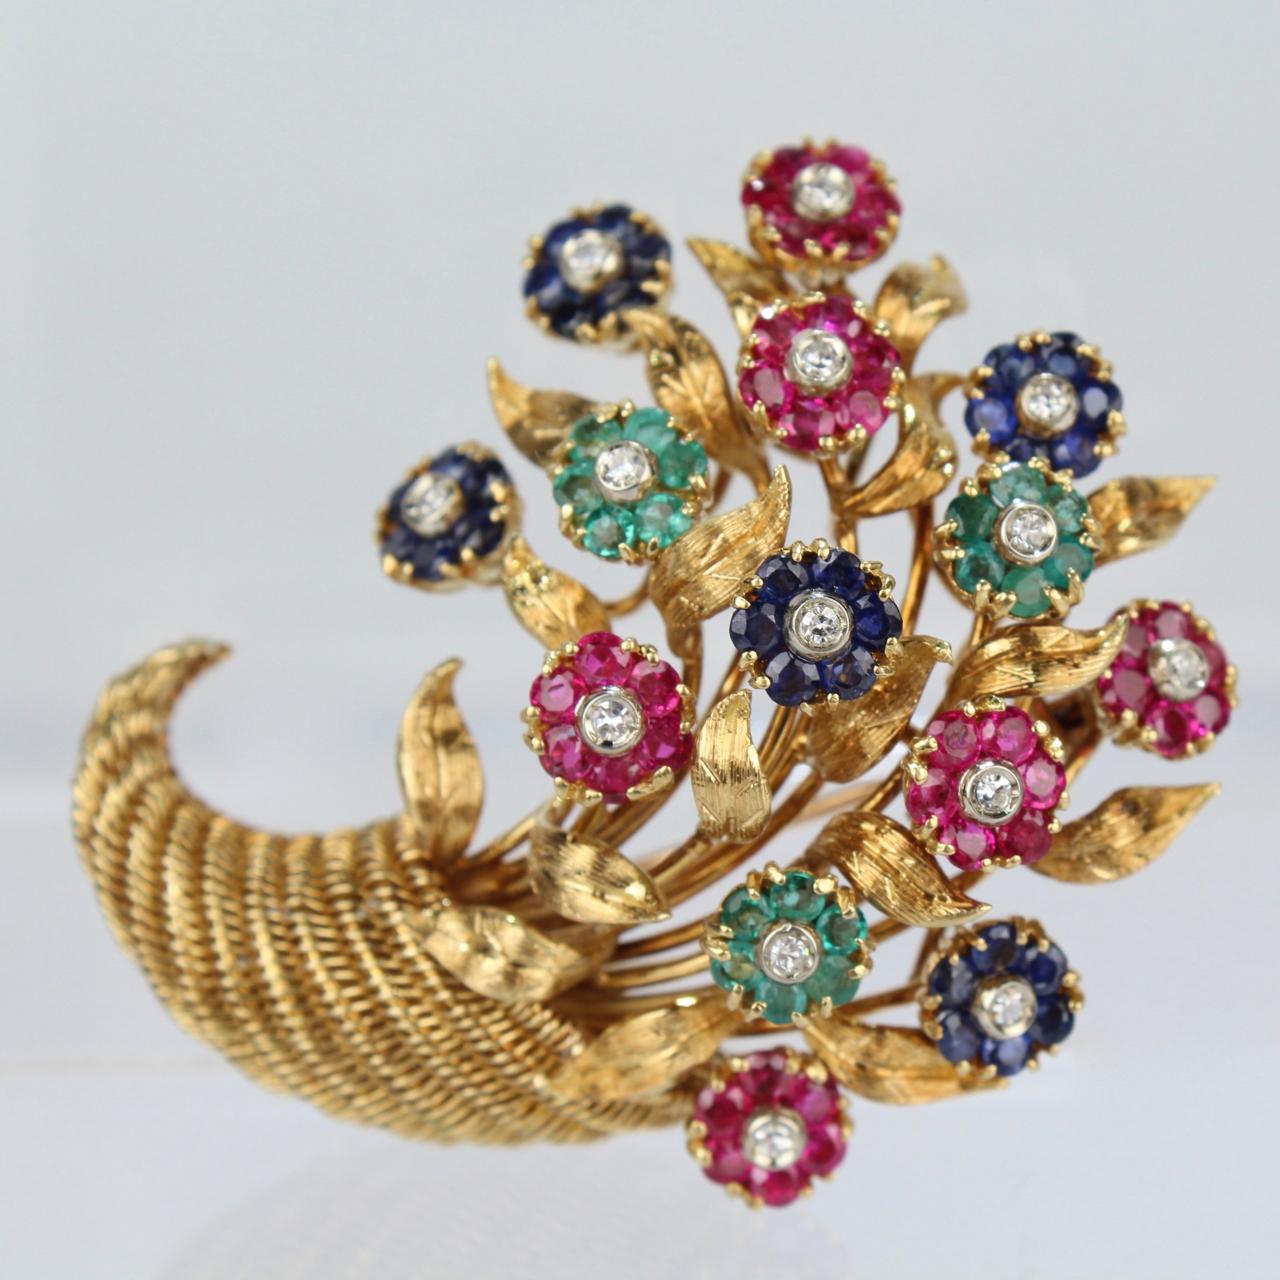 A fine and rare Tiffany & Co. 18-karat yellow gold en tremblant brooch set with diamonds, sapphires, rubies, and emeralds.

Simply exquisite with gemstone rosettes, textured gold leaves, and a wirework cornucopia basket.

Each flower trembling